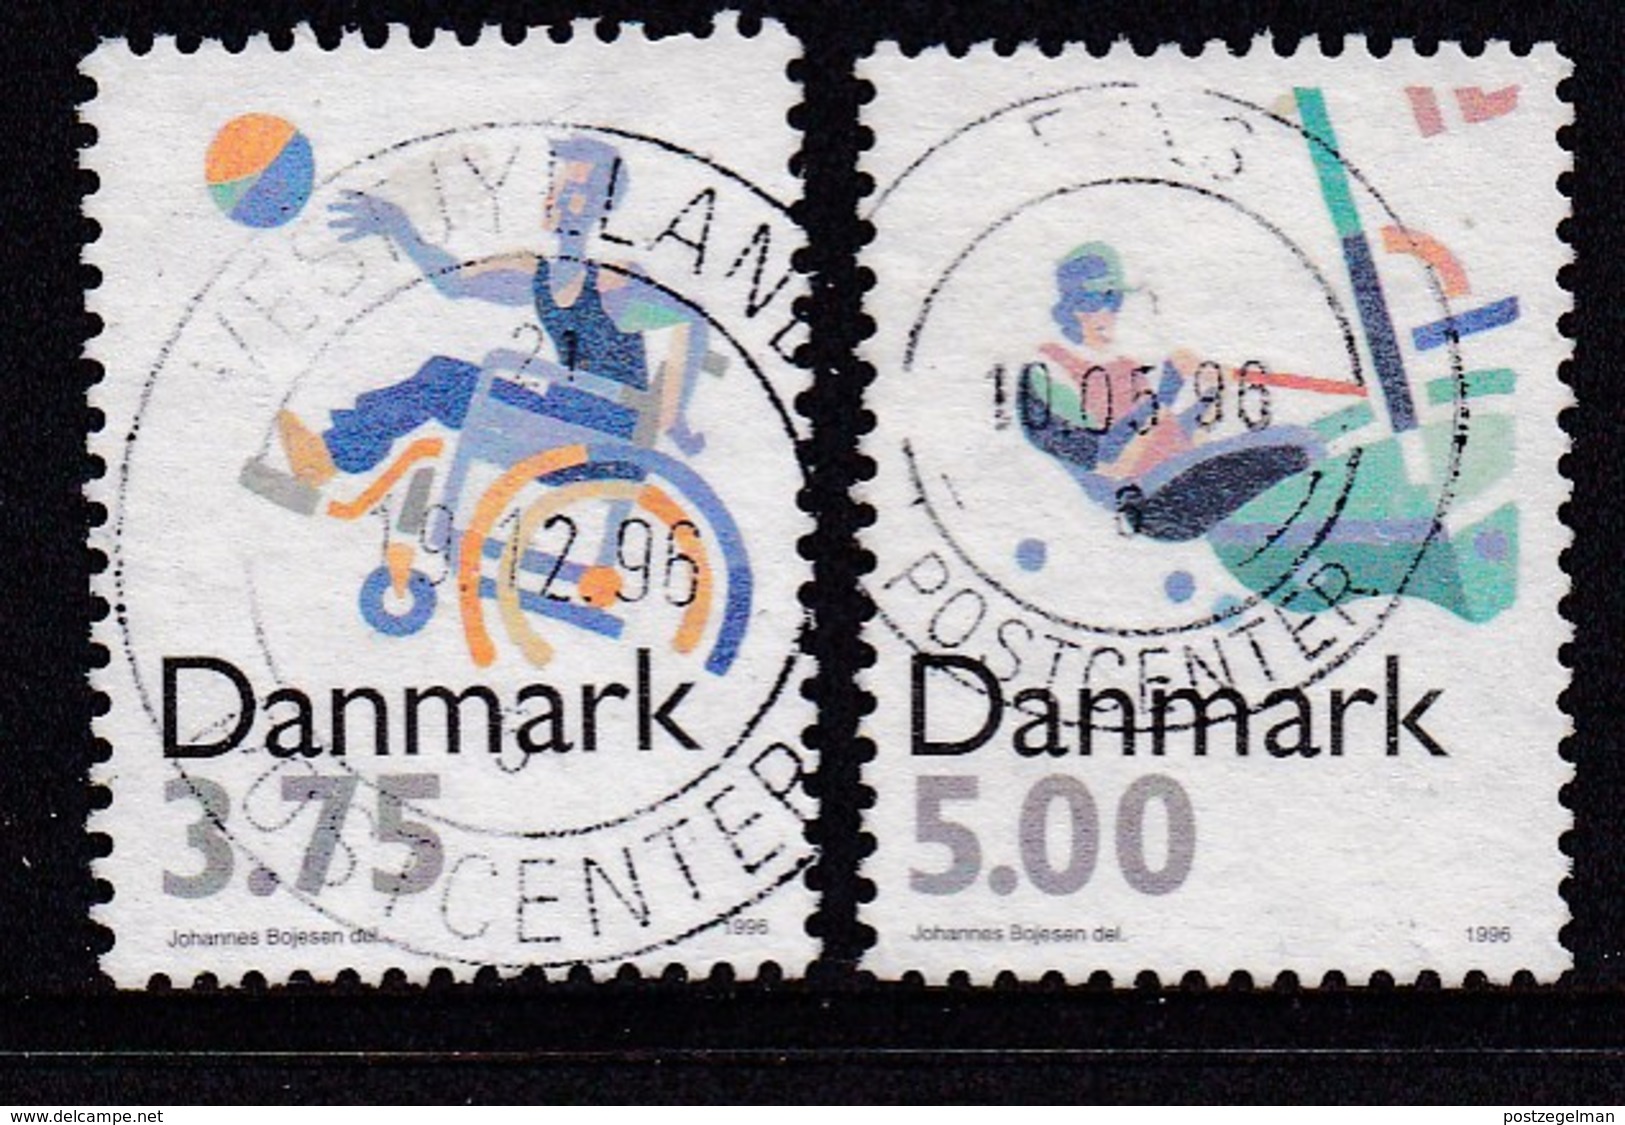 DENMARK, 1996, Used Stamp(s),Olympic Games, MI 1120=1123, #10222, 2 Values Only - Used Stamps